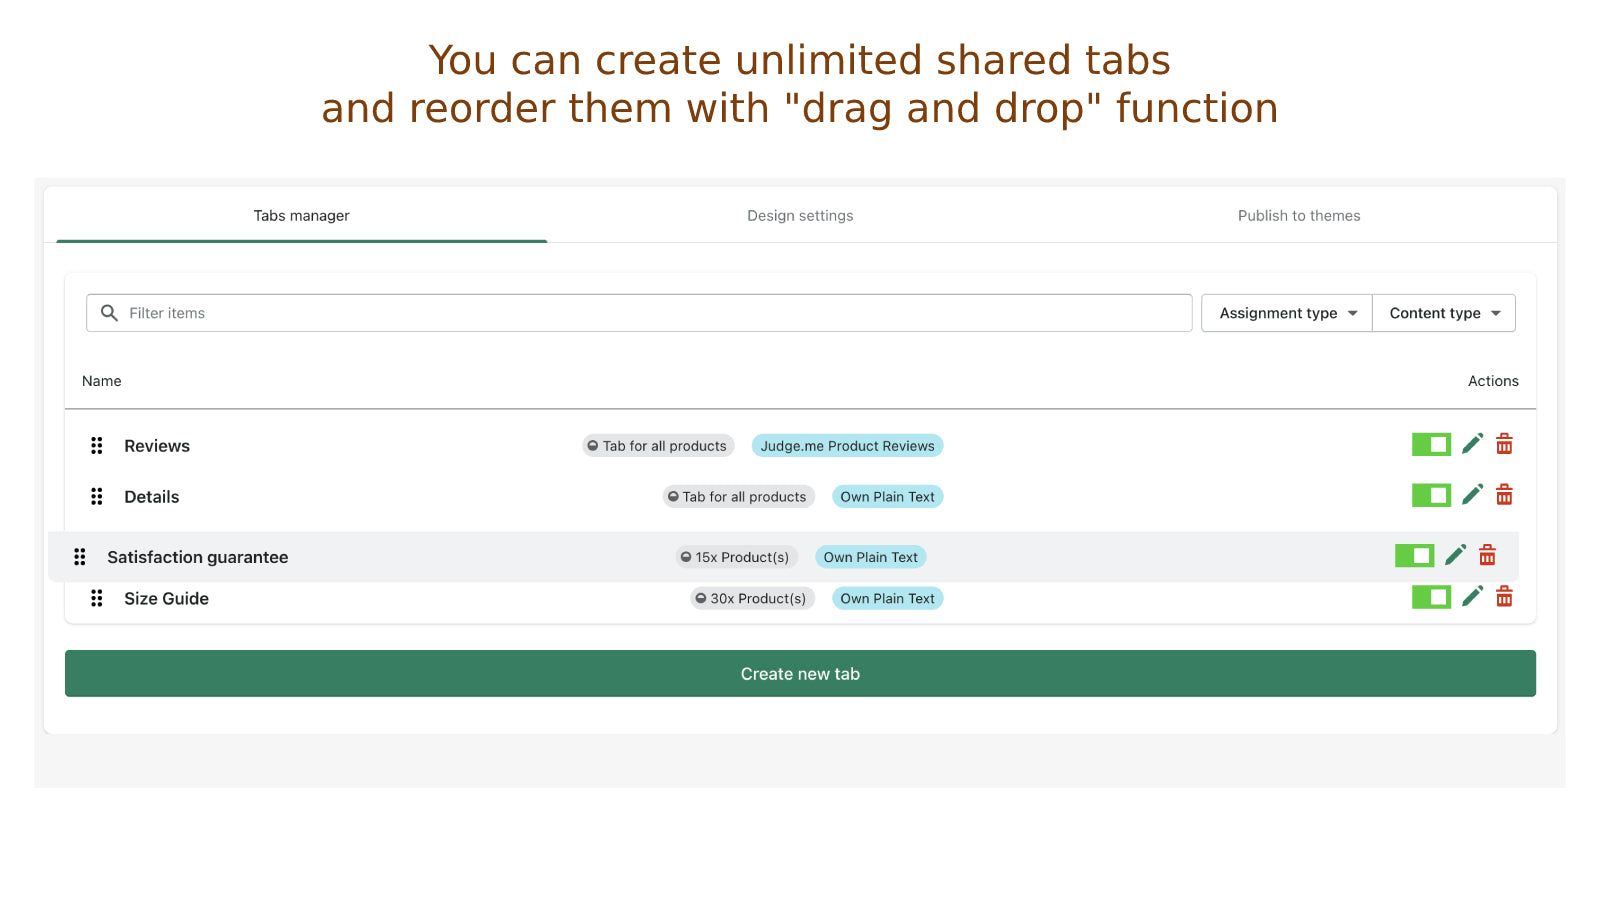 You can create unlimited shared tabs for products